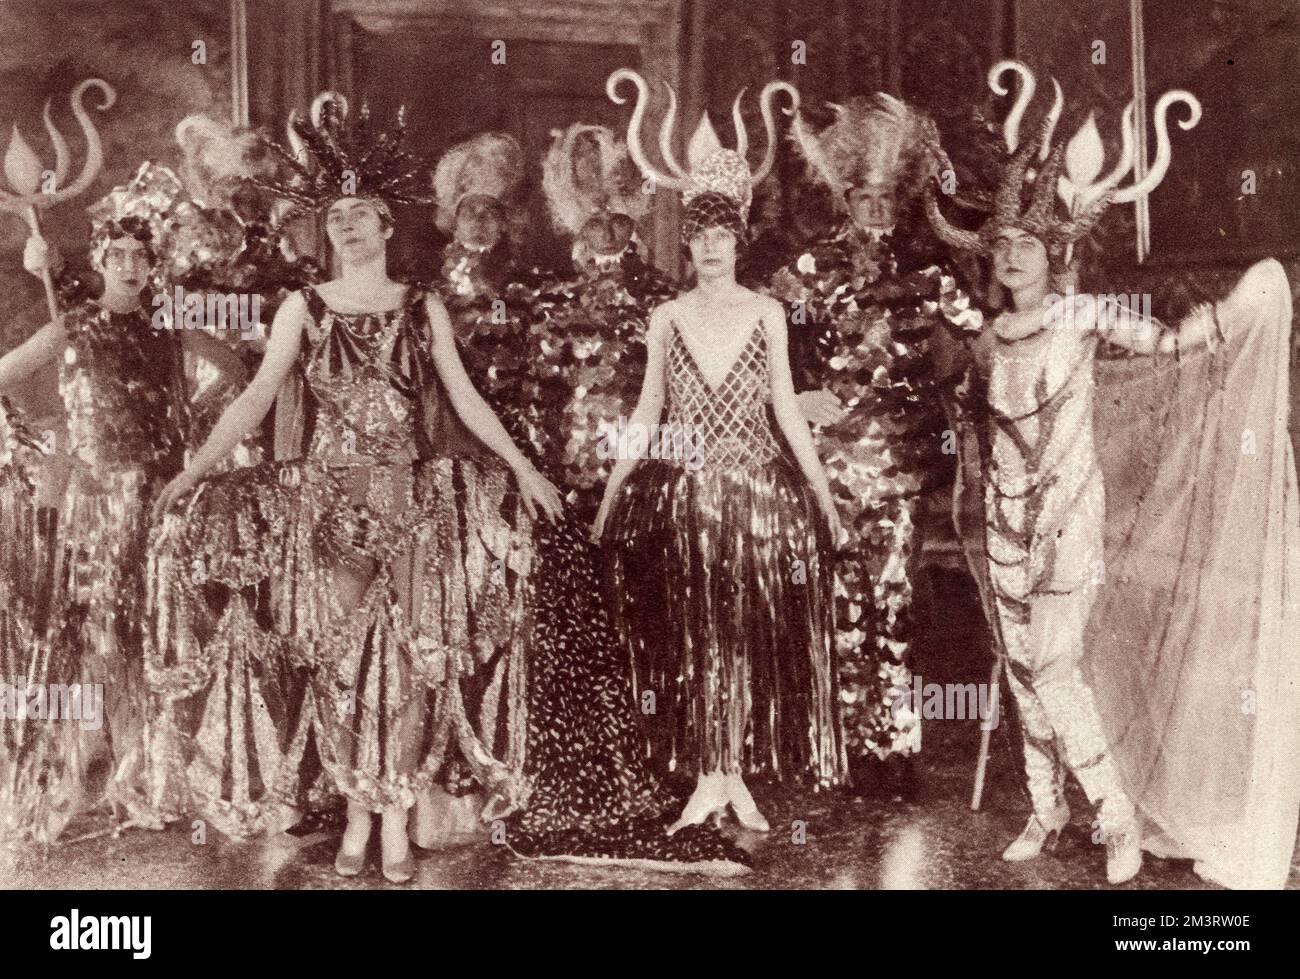 A group on the theme of 'Neptune's Embassy' at Baroness D'Erlanger's celebrated costume ball at the Fenice Theatre, Venice in 1926.  From left, Princess de Faucigny-Lucigne (Baba D'Erlanger) as water, Viscountess Wimborne as the earth, Mrs Evelyn Fitzgerald as seaweed and Comtesse de Buccino as coral.  Several tritons form the back row!     Date: 1926 Stock Photo